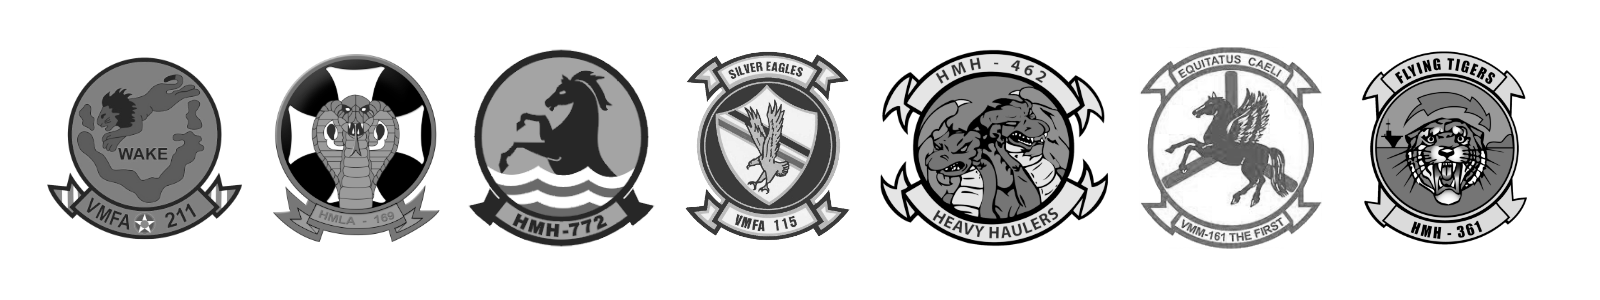 marine branch-logos-for-challenge-coins